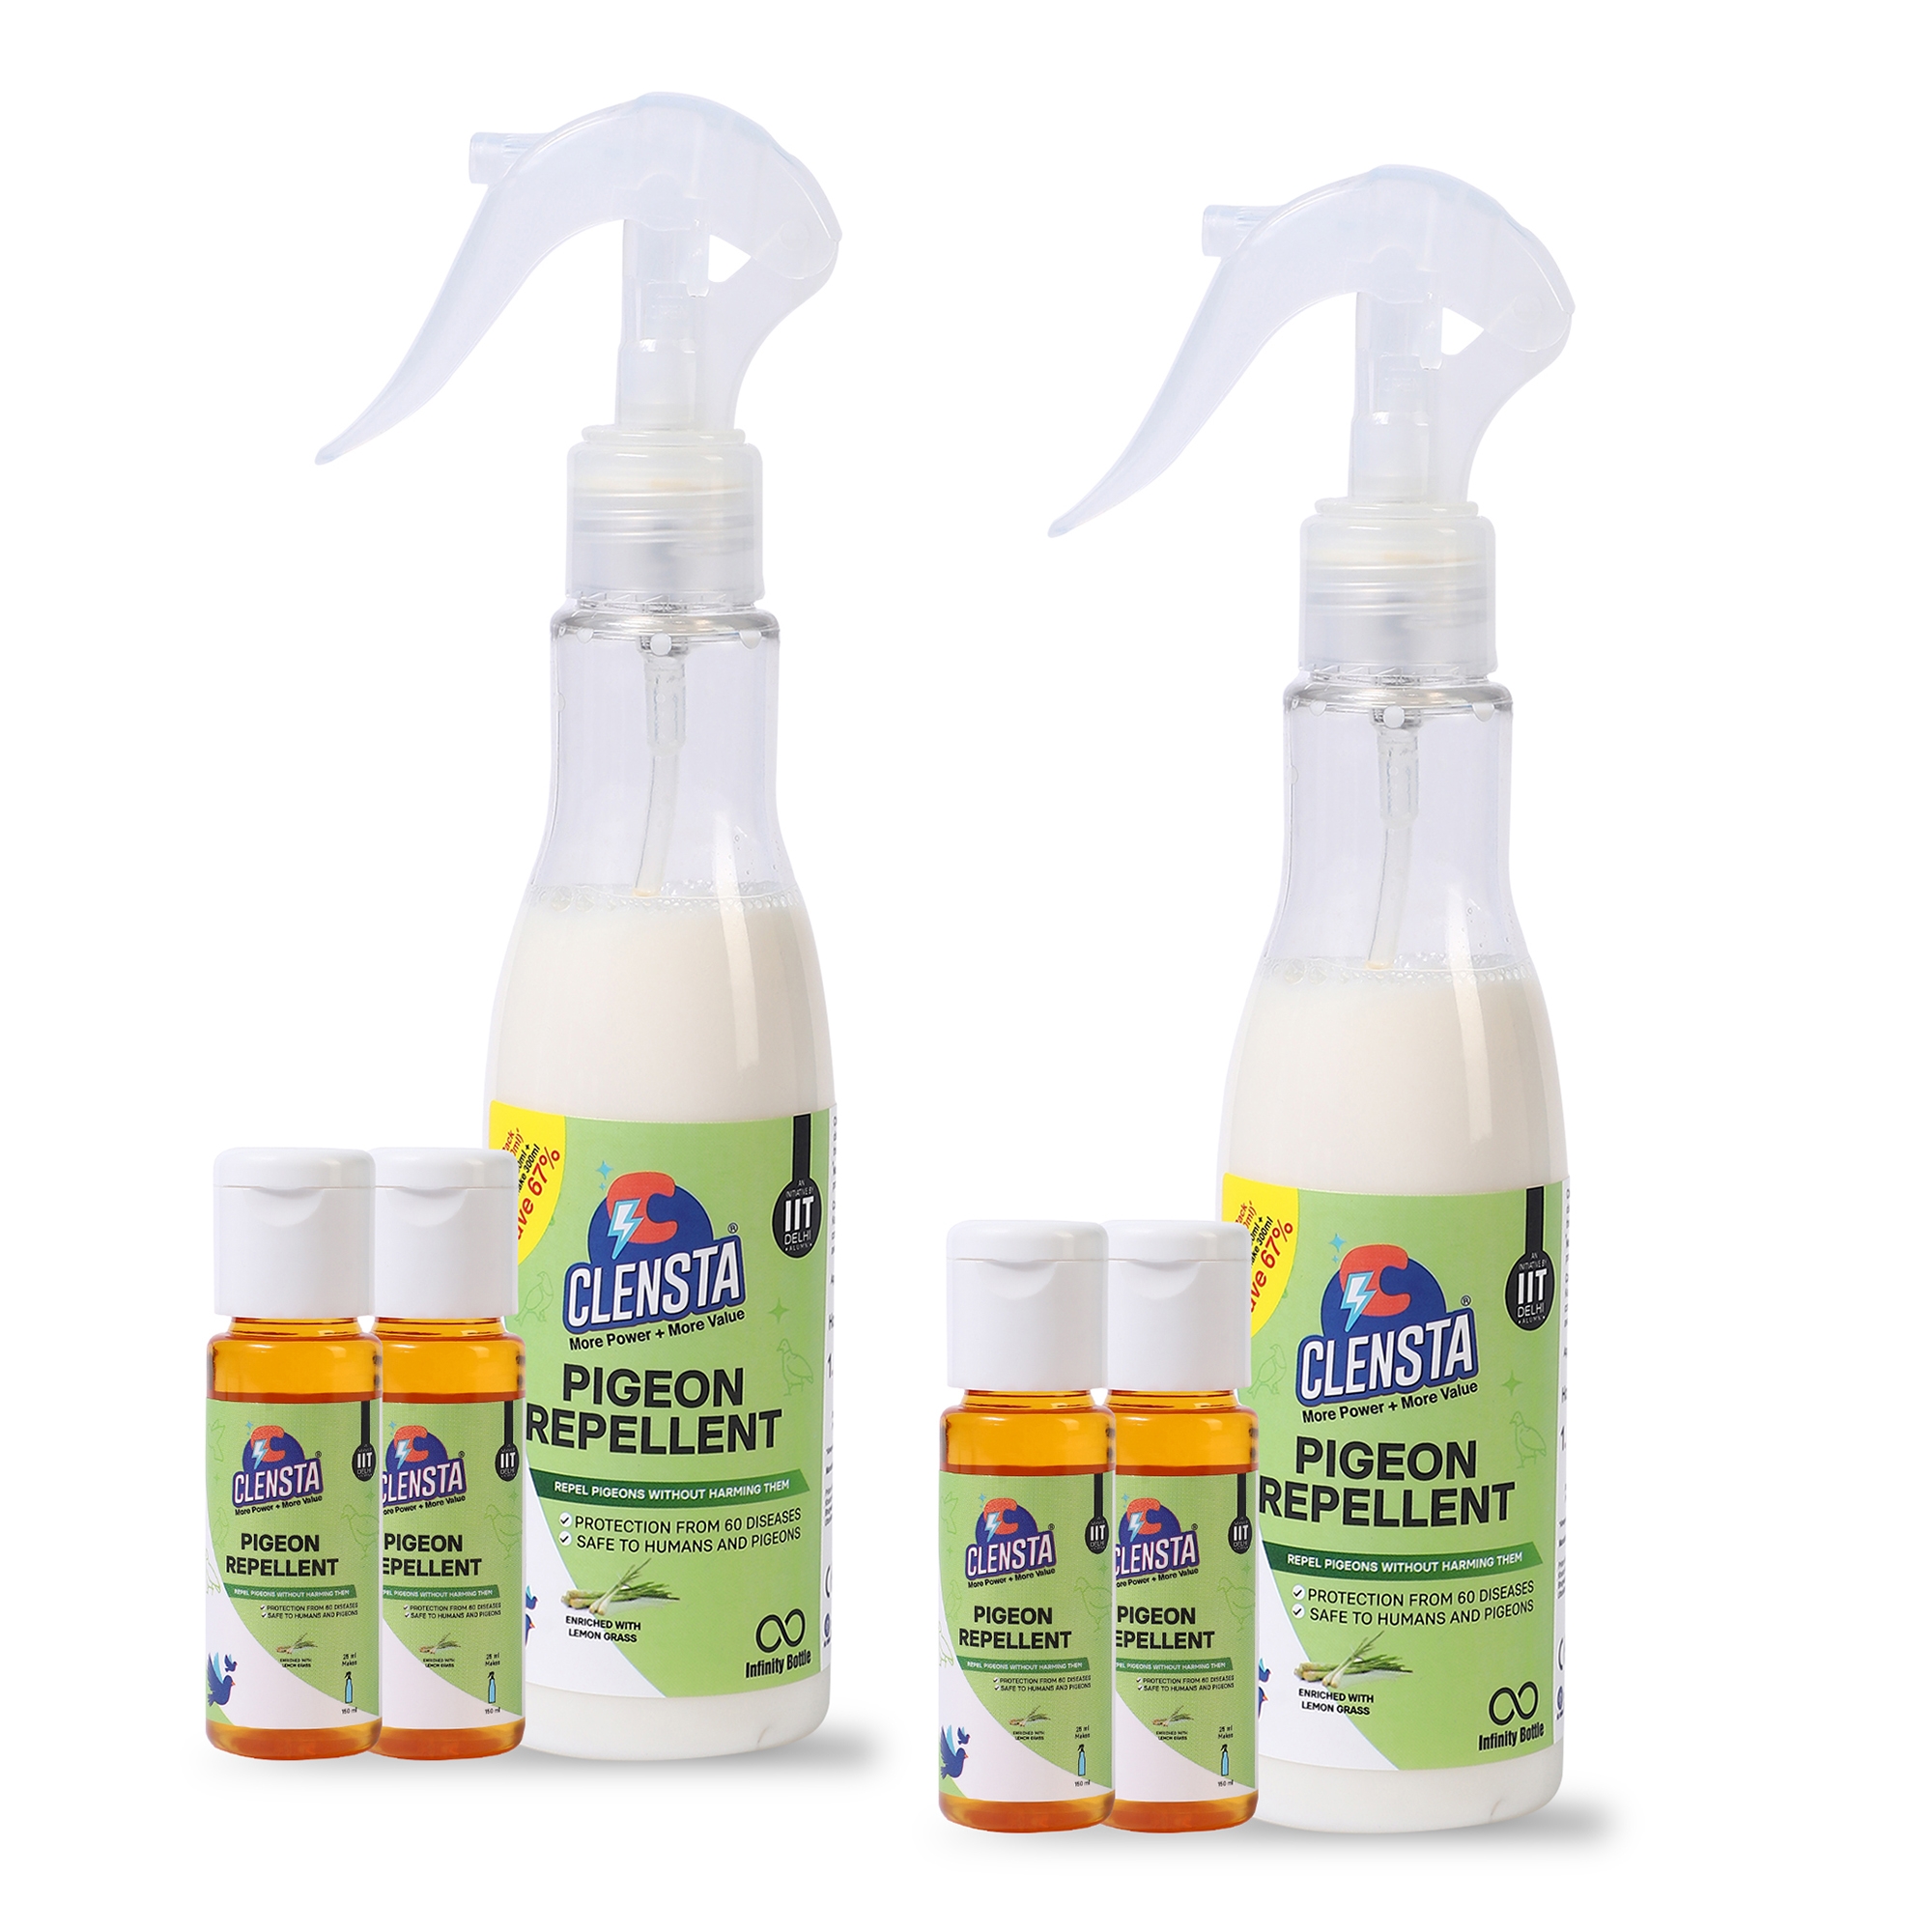 Clensta | Clensta Pigeon Repellent Spray | Harmless for Pigeon | Get Positive Results in 10 days | 1 Bottle (150 ml) & 2 Concentrates (Makes 300 ml) | Pack of 2